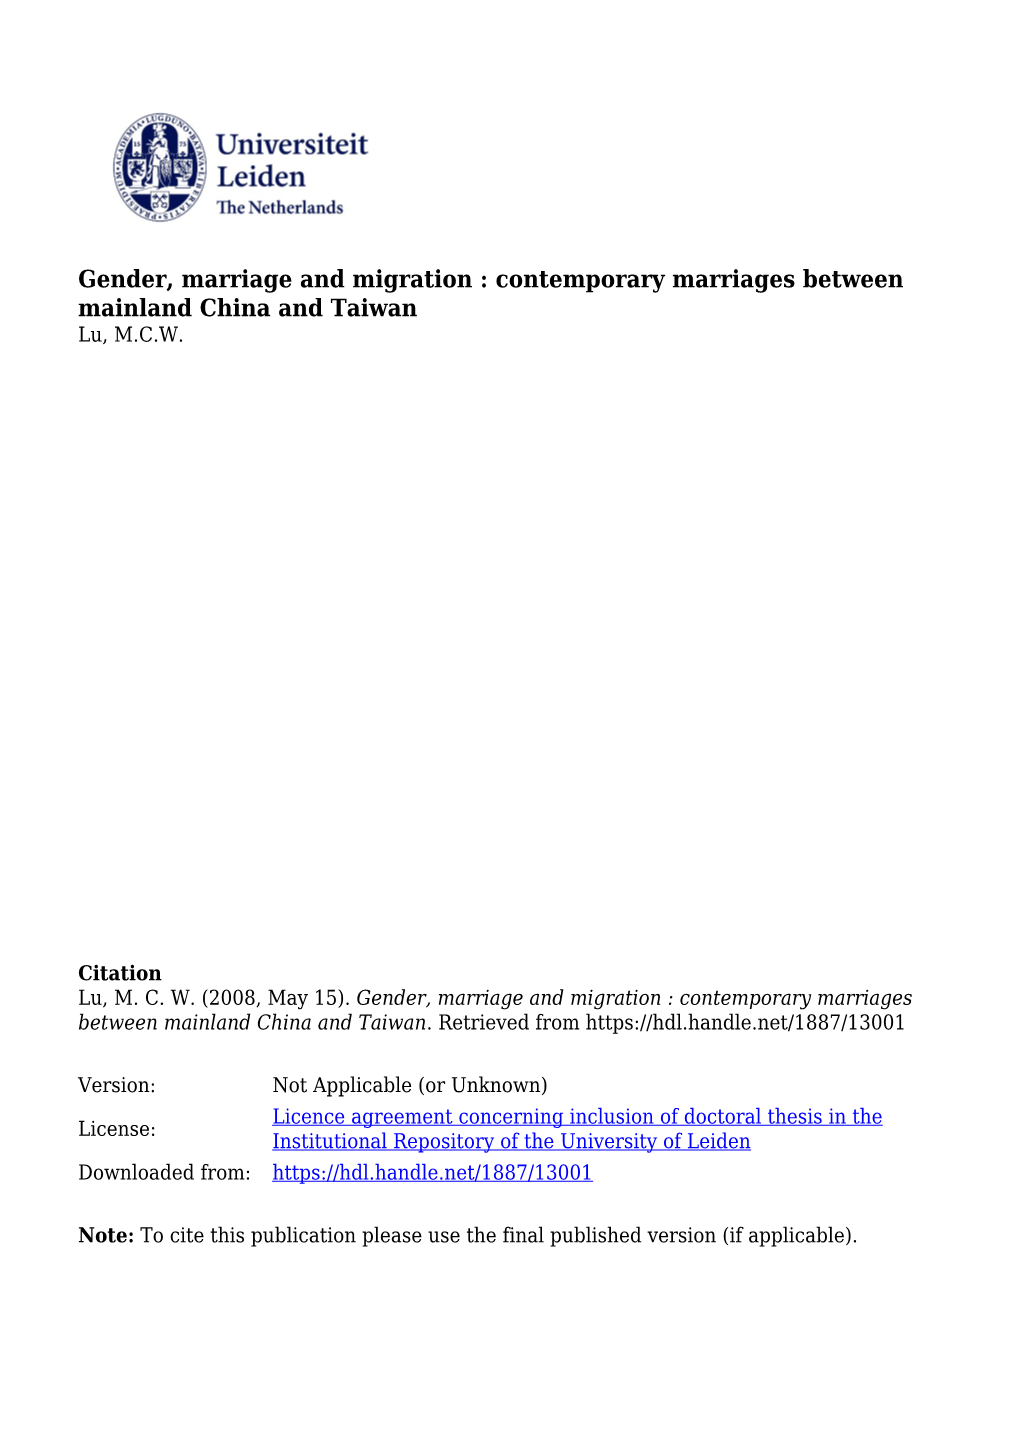 Gender, Marriage and Migration